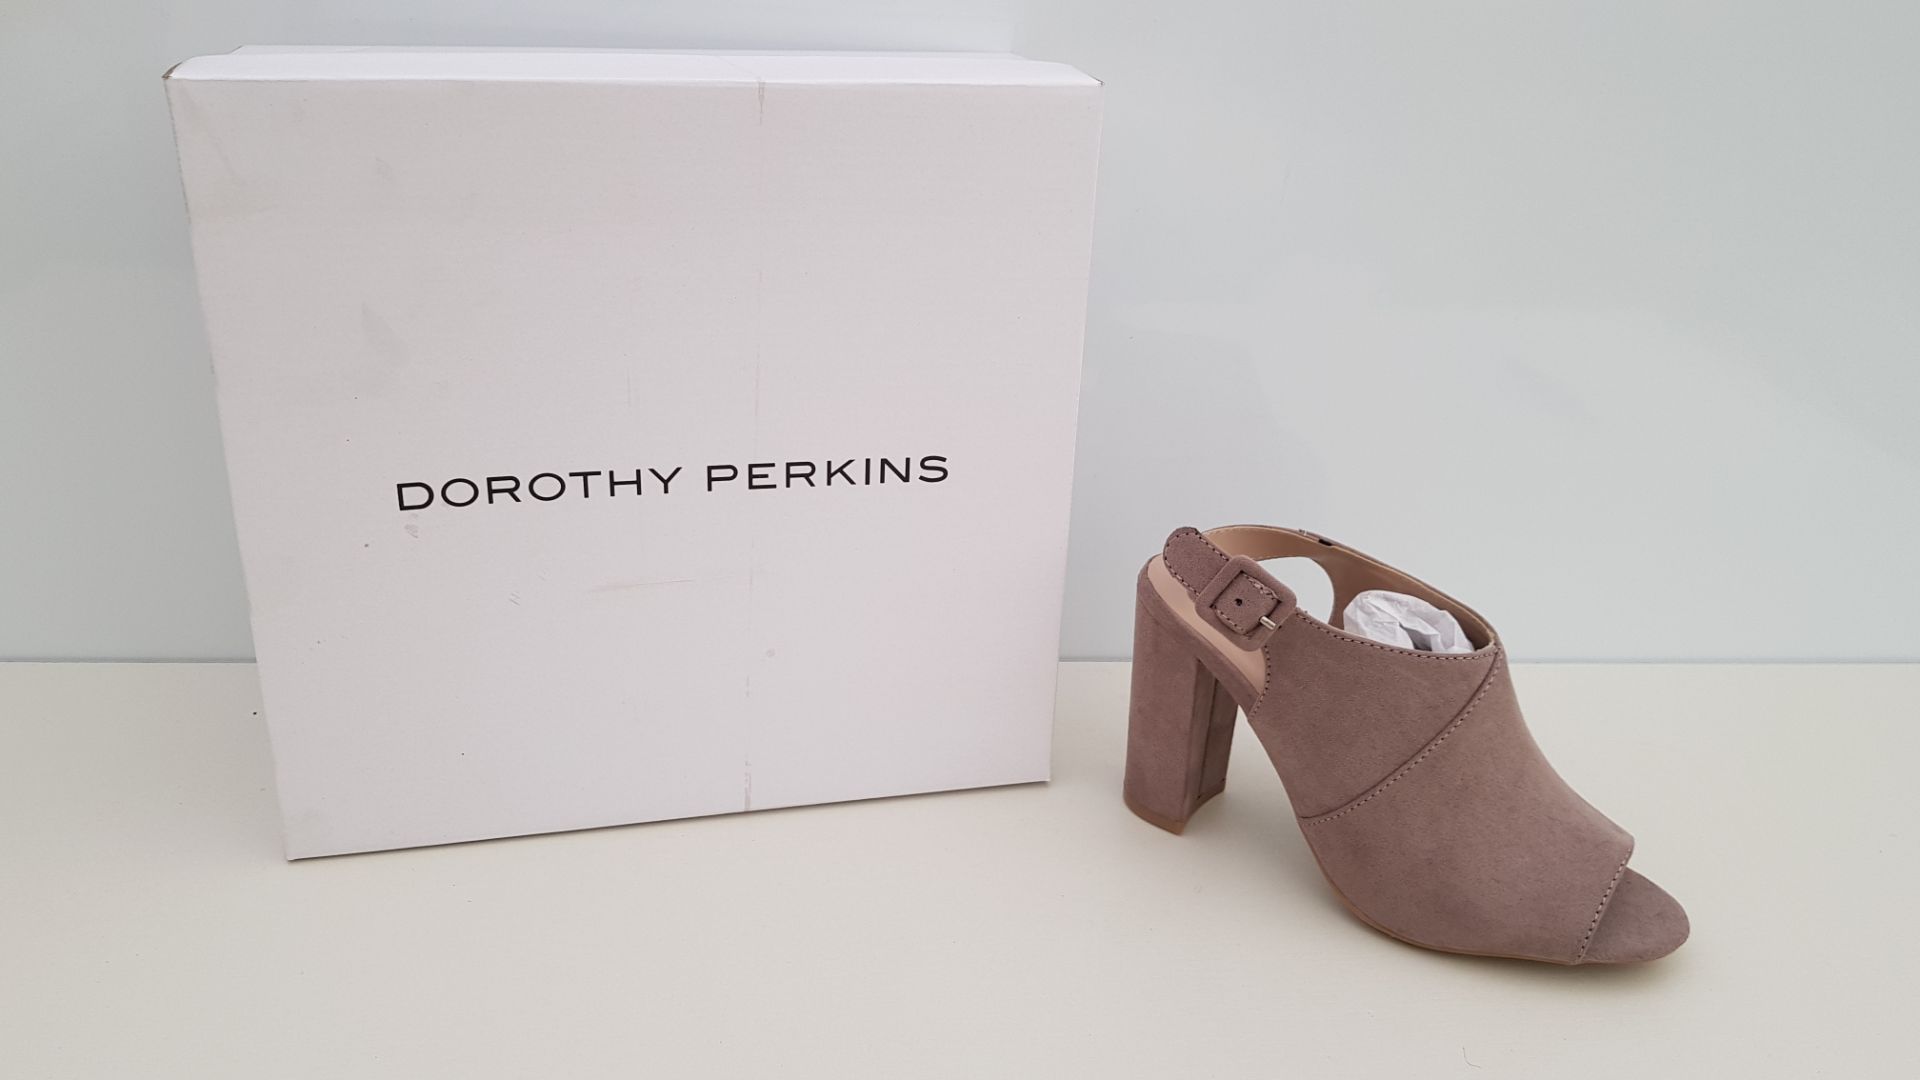 16 X BRAND NEW TOPSHOP TAUPE SAVO SHOES UK SIZE 3 AND 6 RRP £28.00 (TOTAL RRP £448;00)